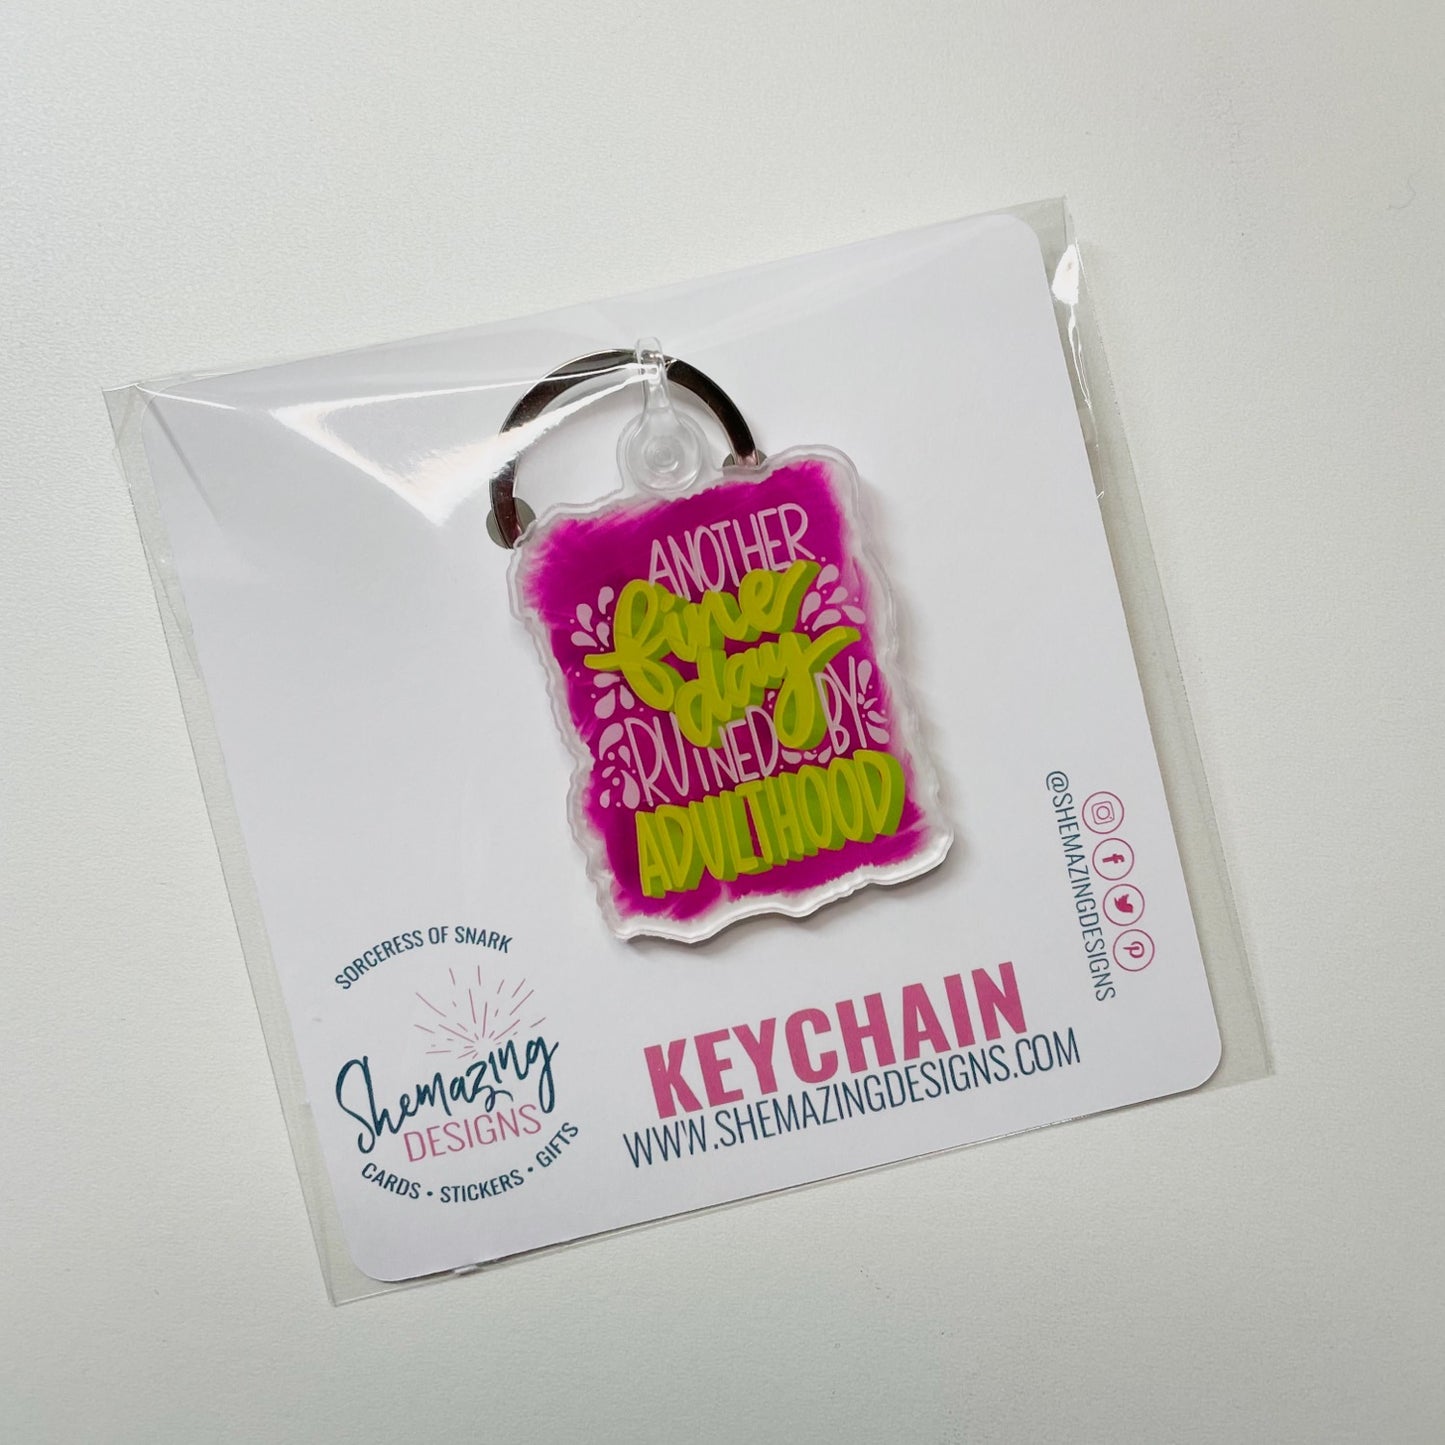 another fine day ruined by adulthood keychain in packaging